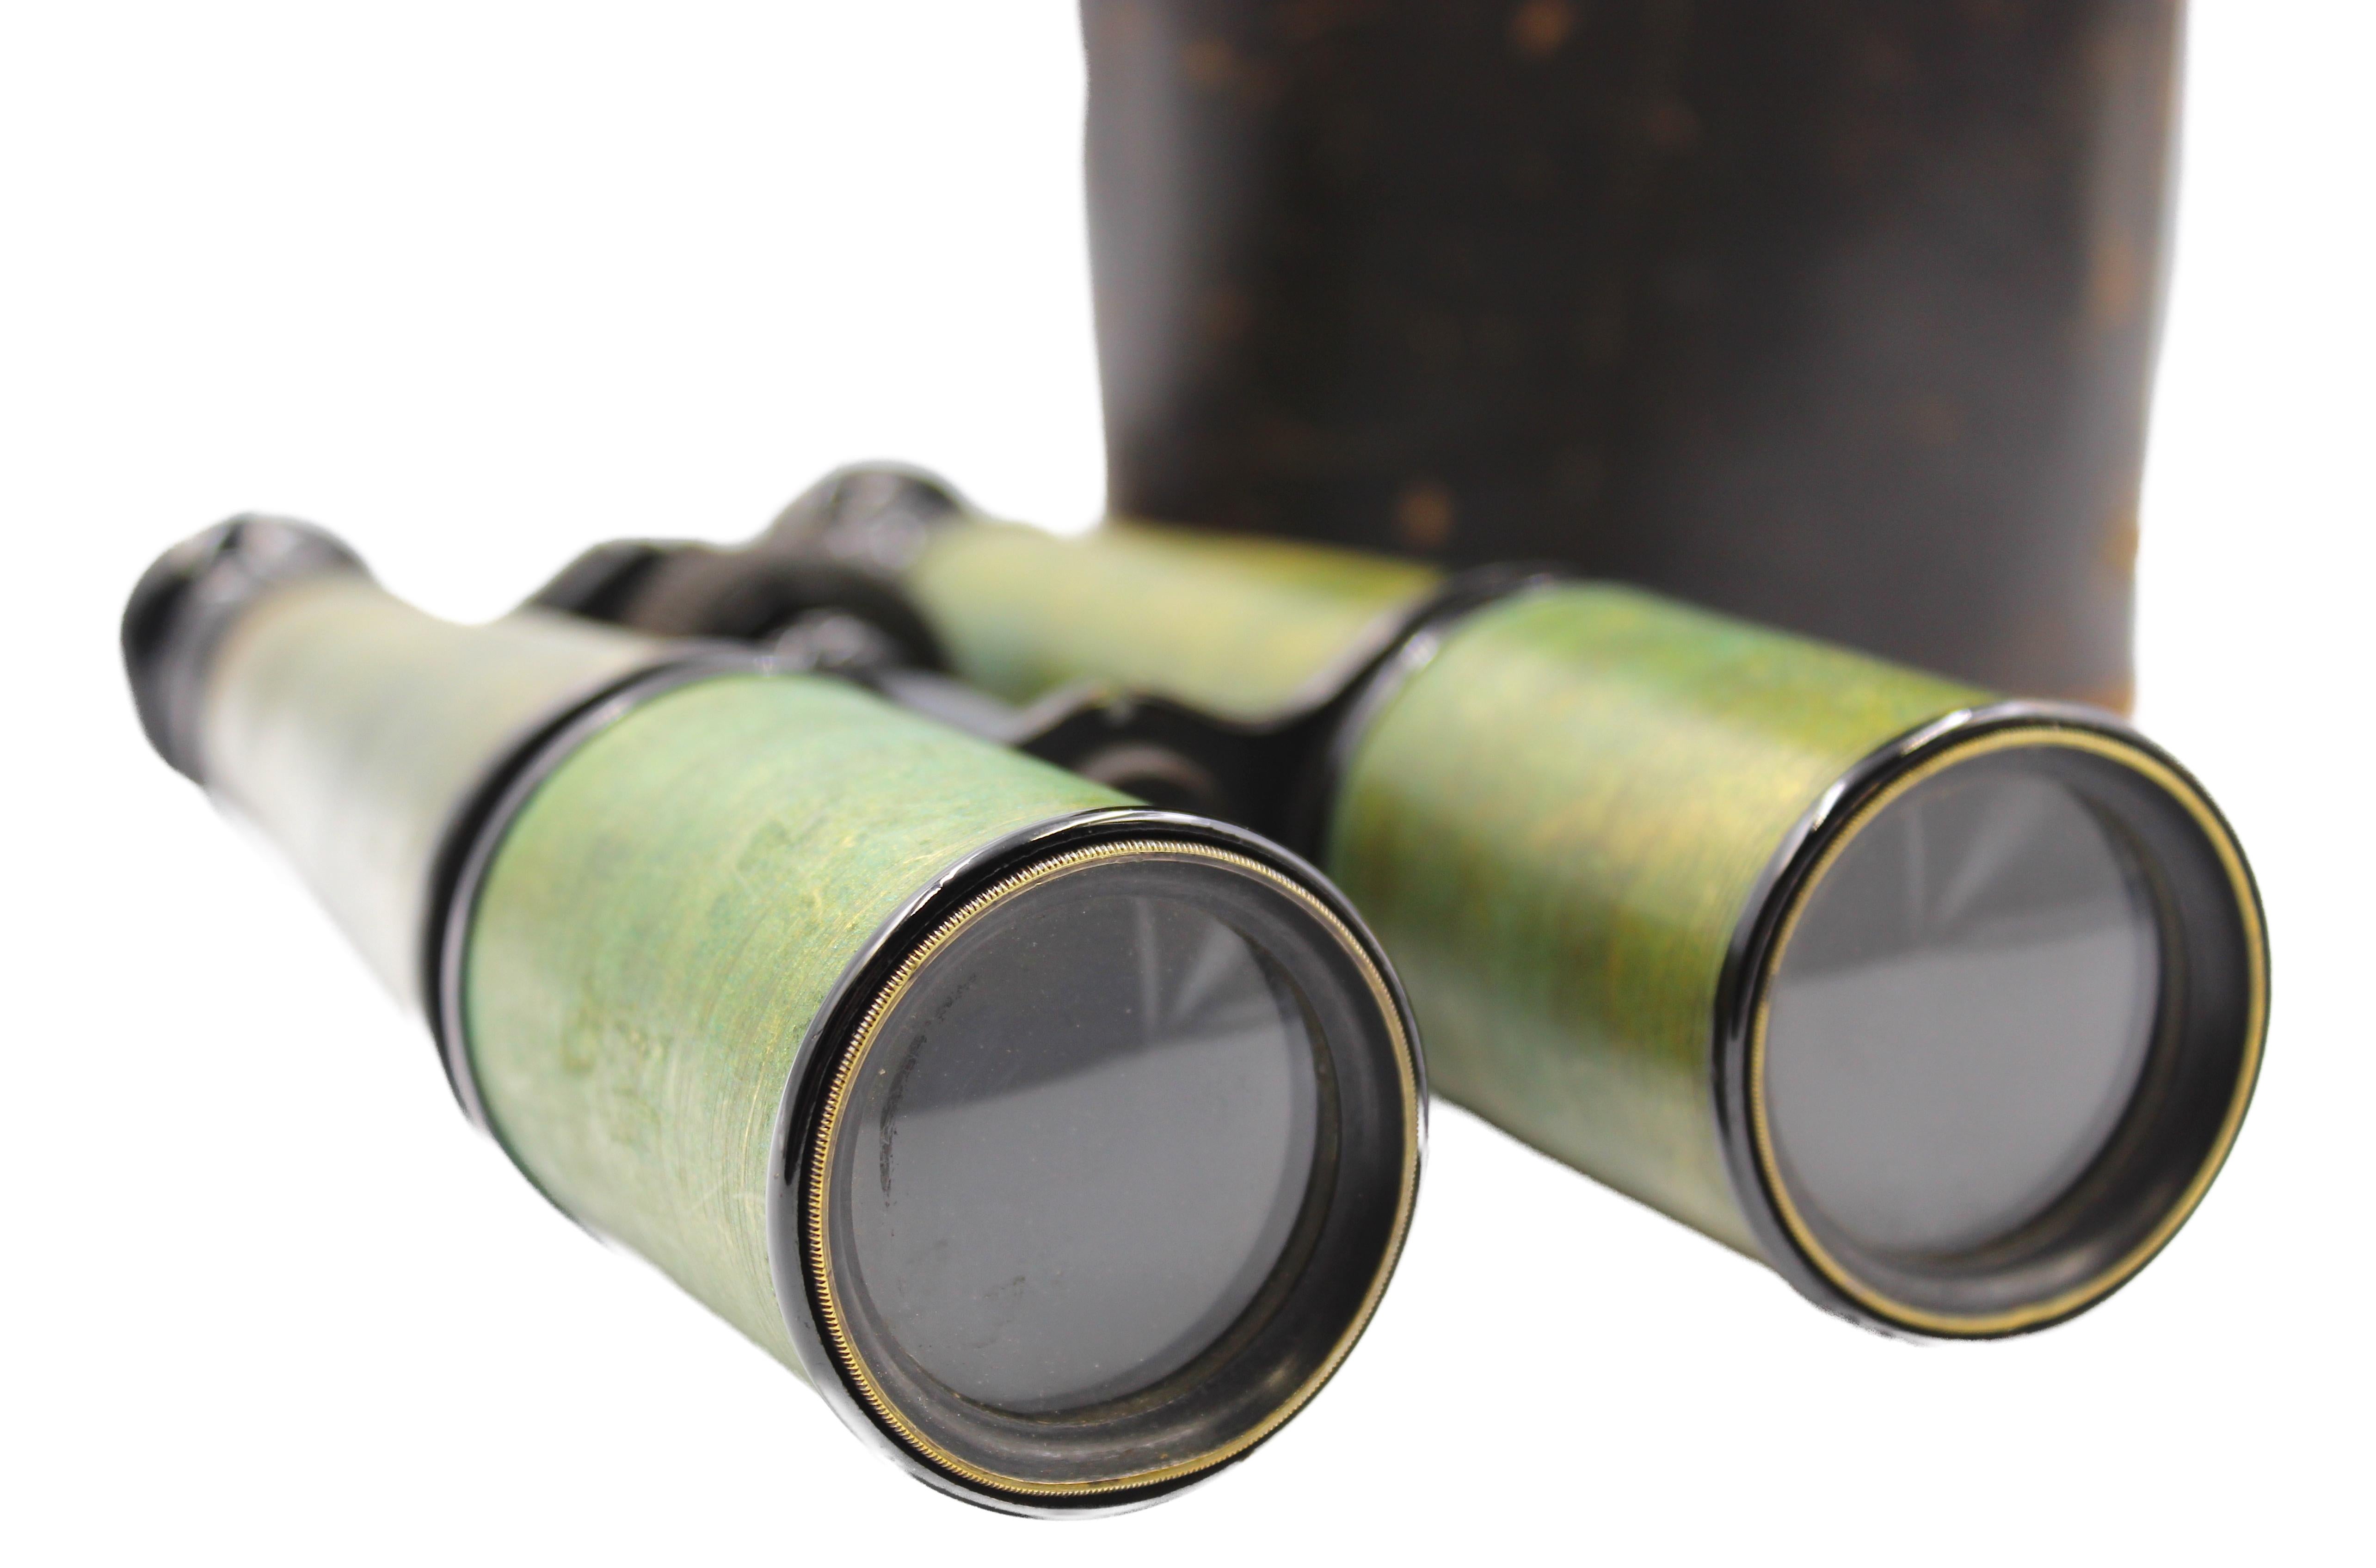 American Vintage Civil War Era Field Glasses by Queen & Co. For Sale